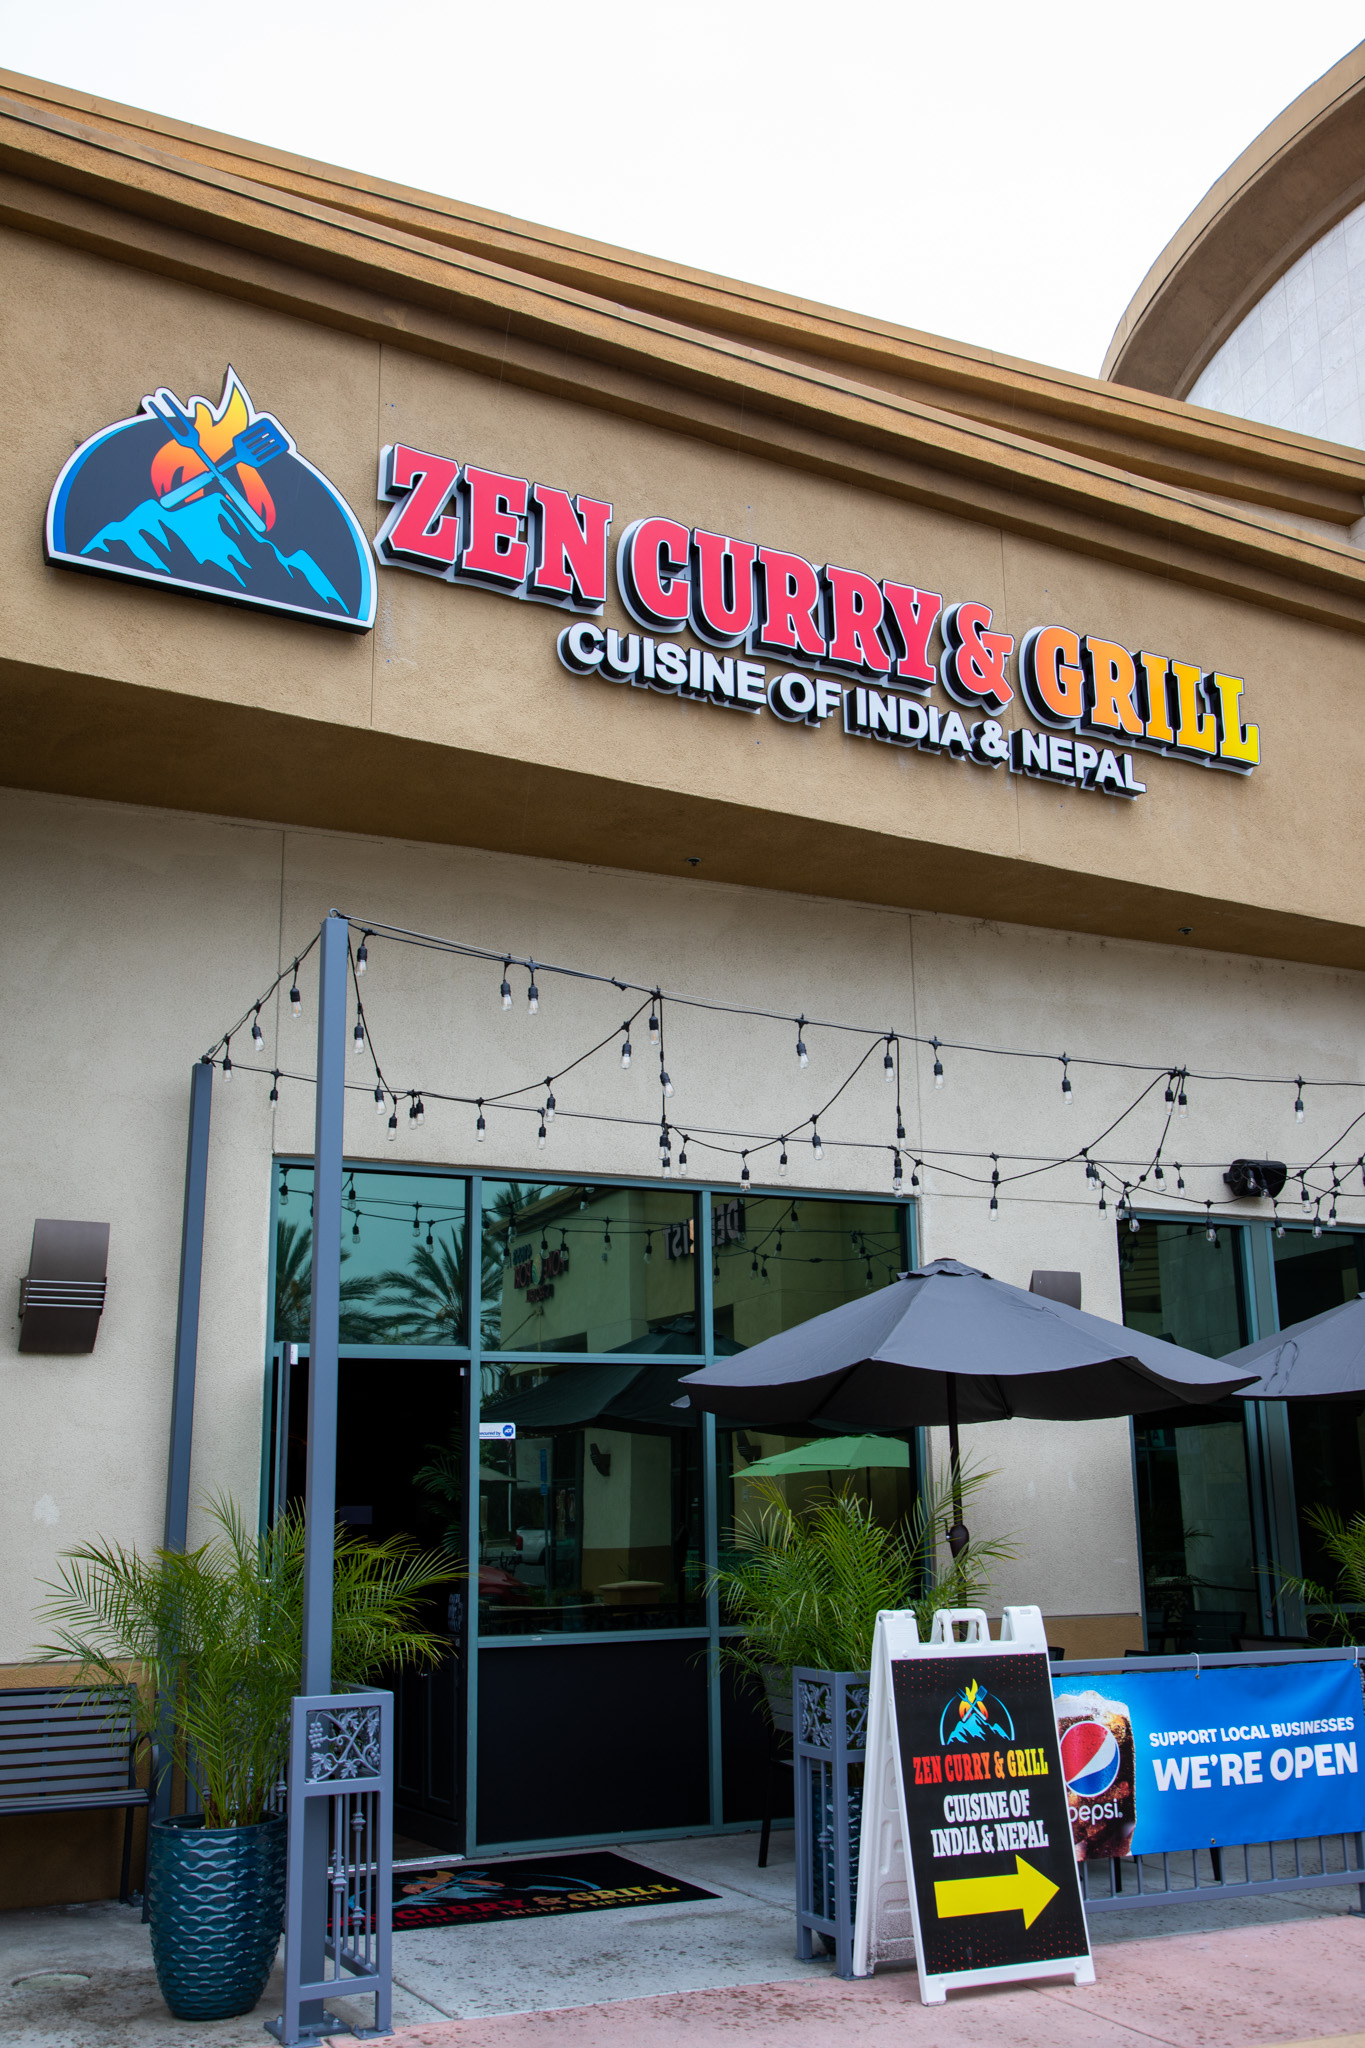 Zen Curry and Grill in Temecula